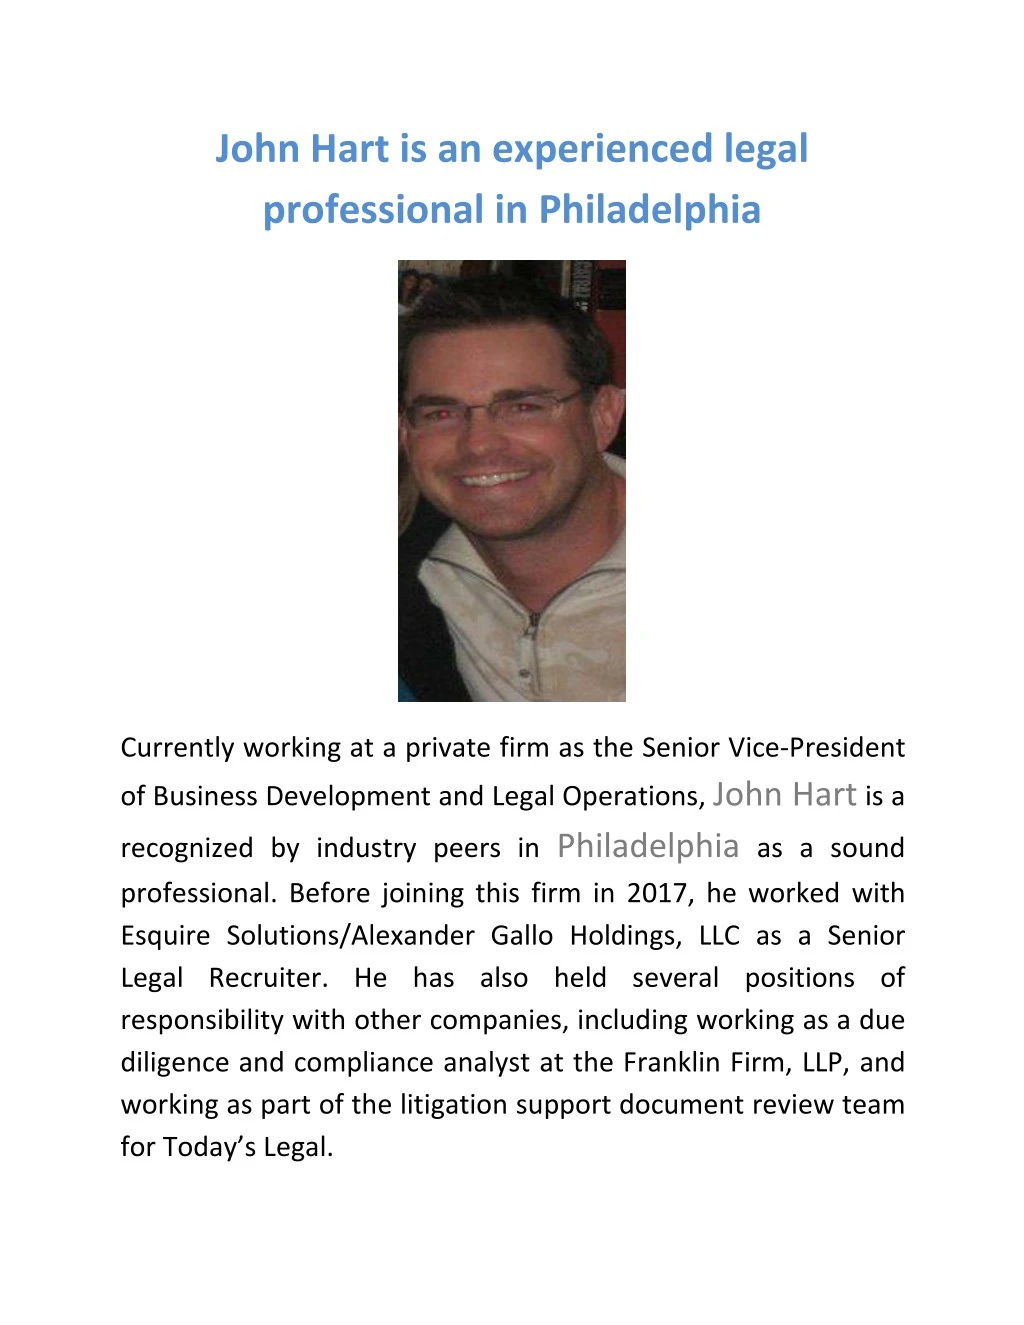 john hart is an experienced legal professional